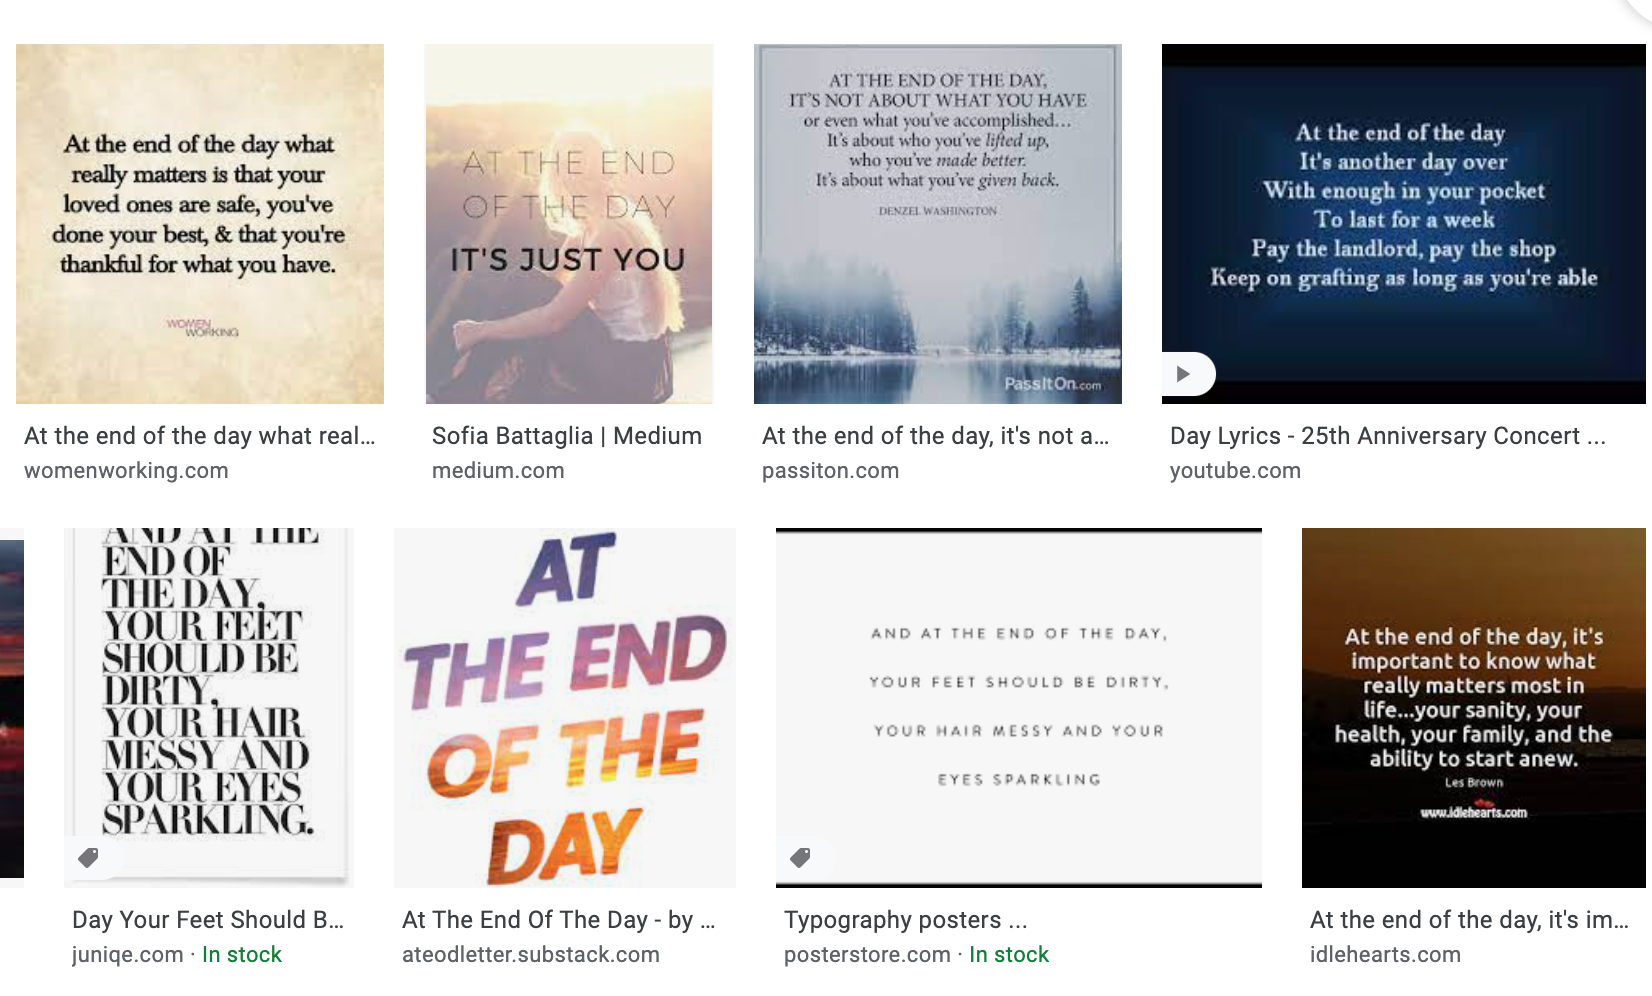 Google Image search for "at the end of the day"